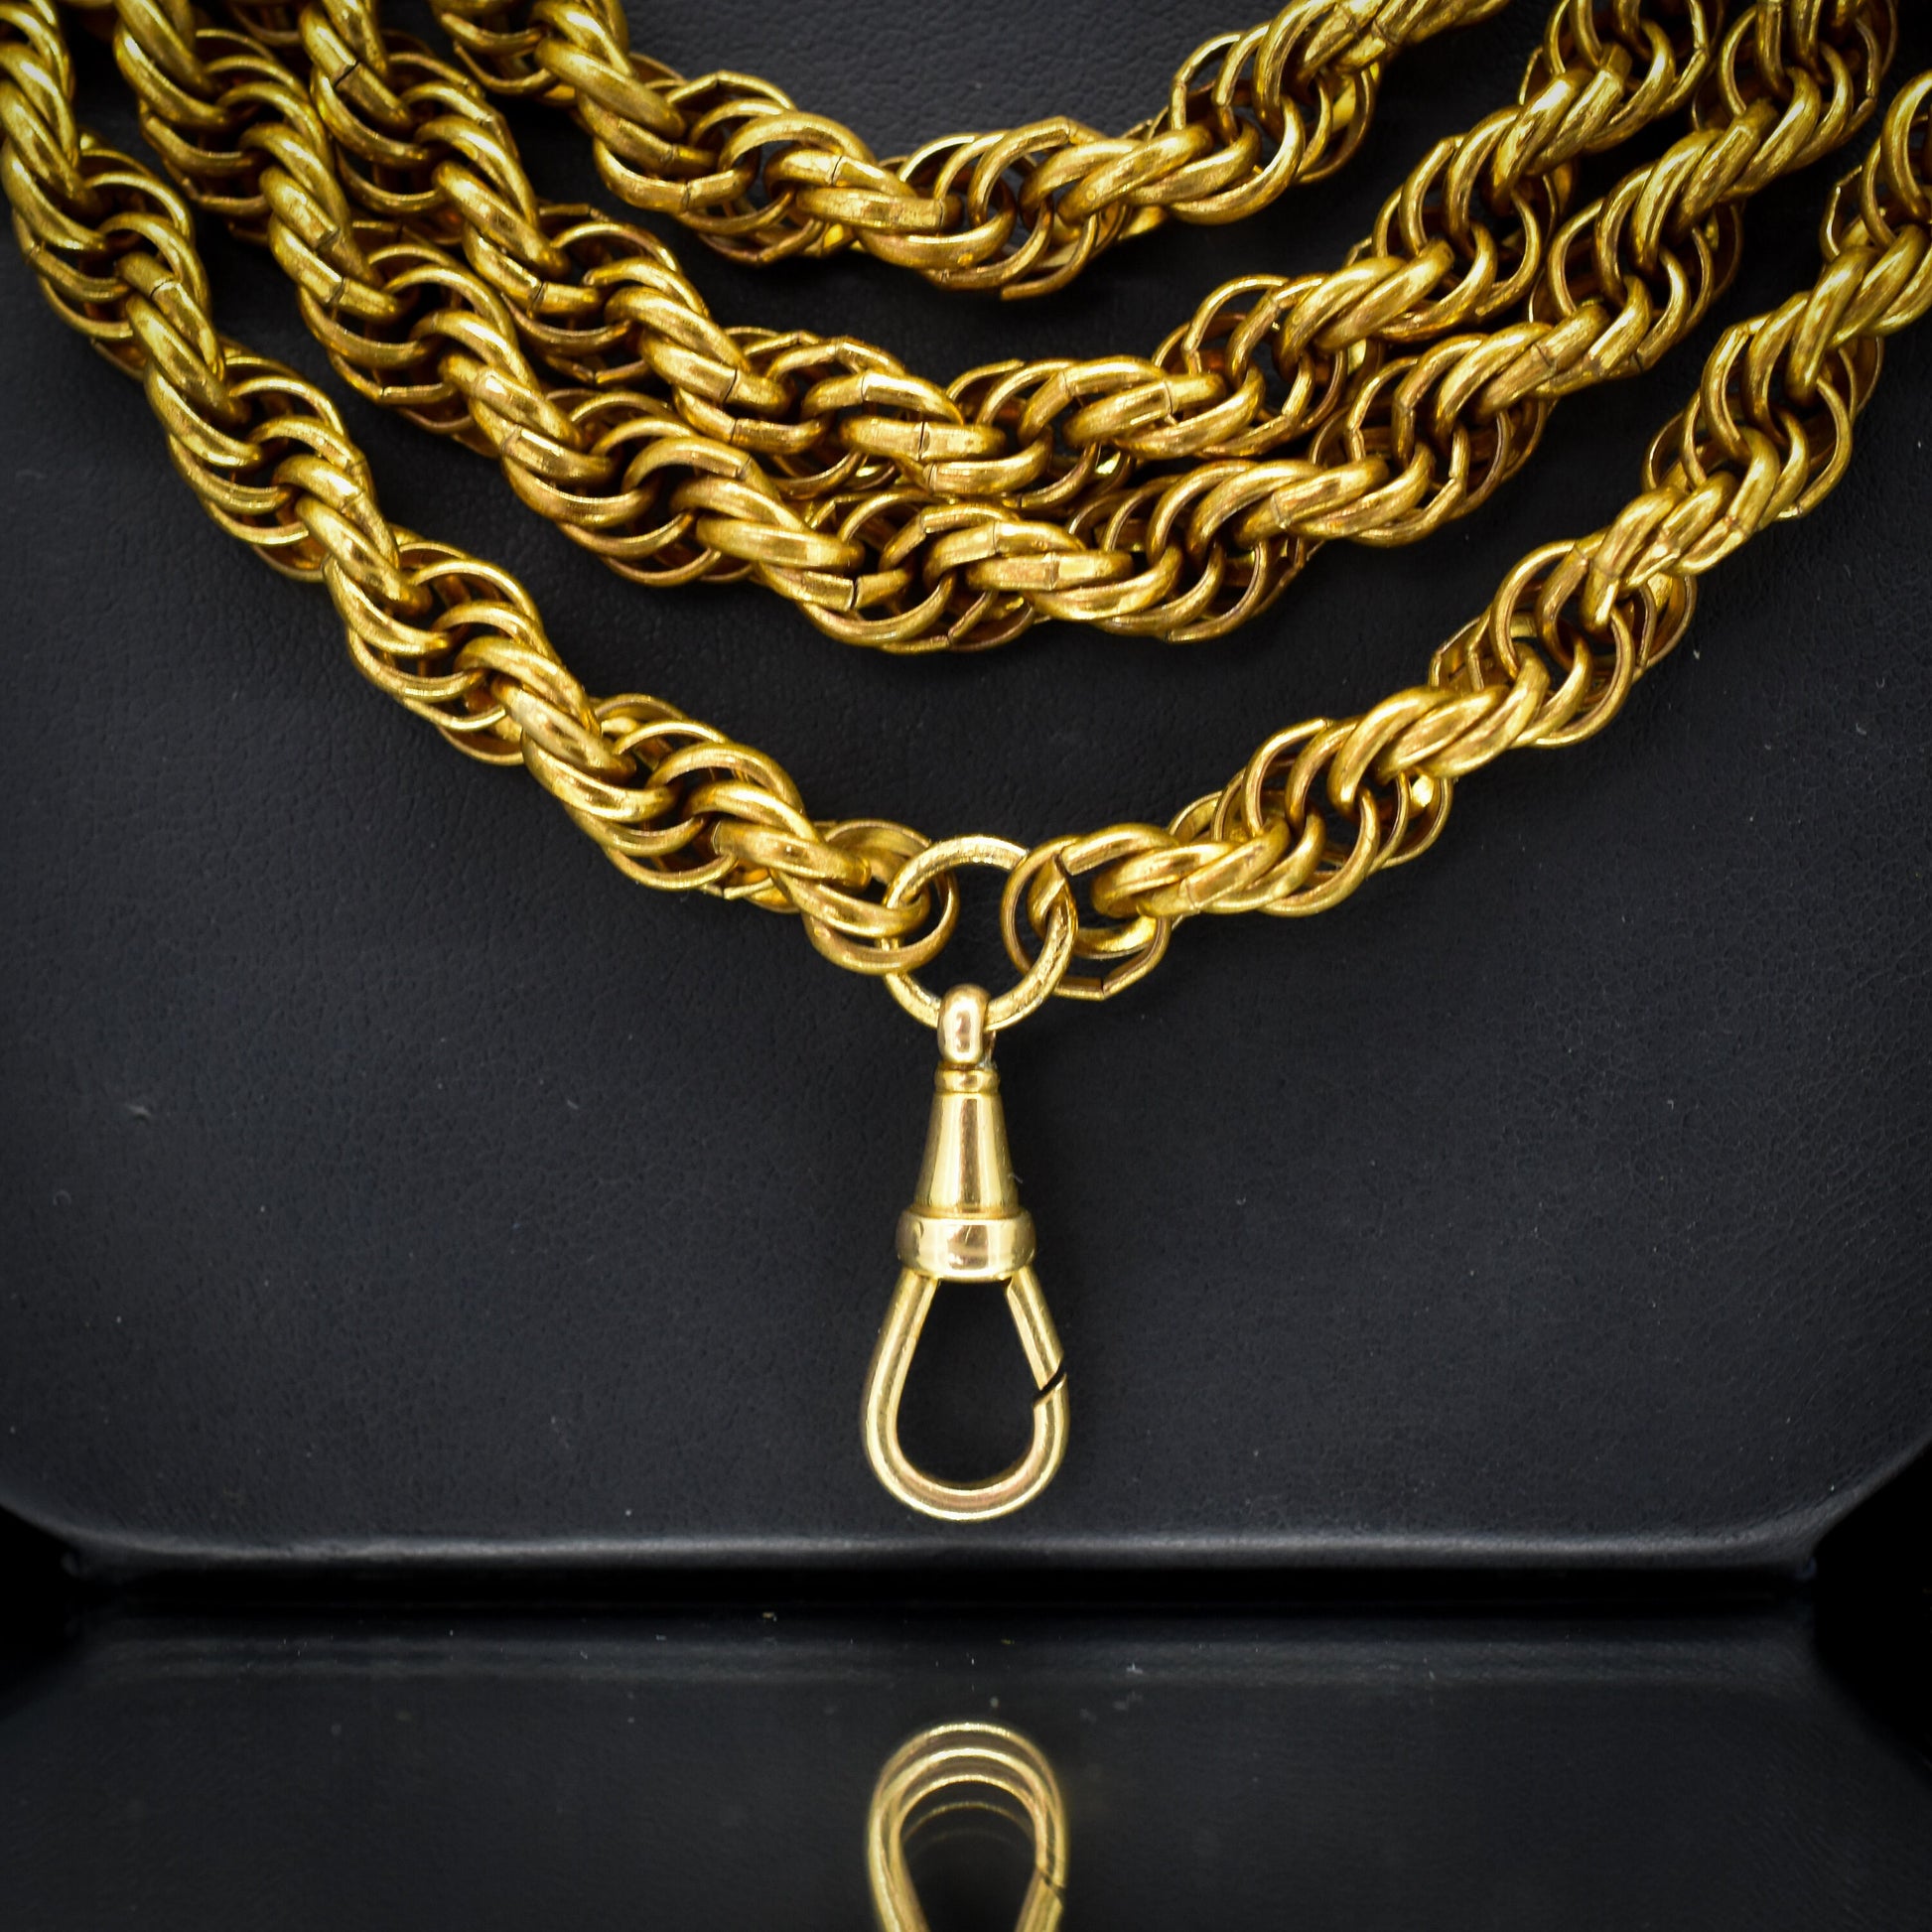 Antique Heavy Long Rope Twist Guard Muff Chain Necklace | 72" Length with Dog Clip